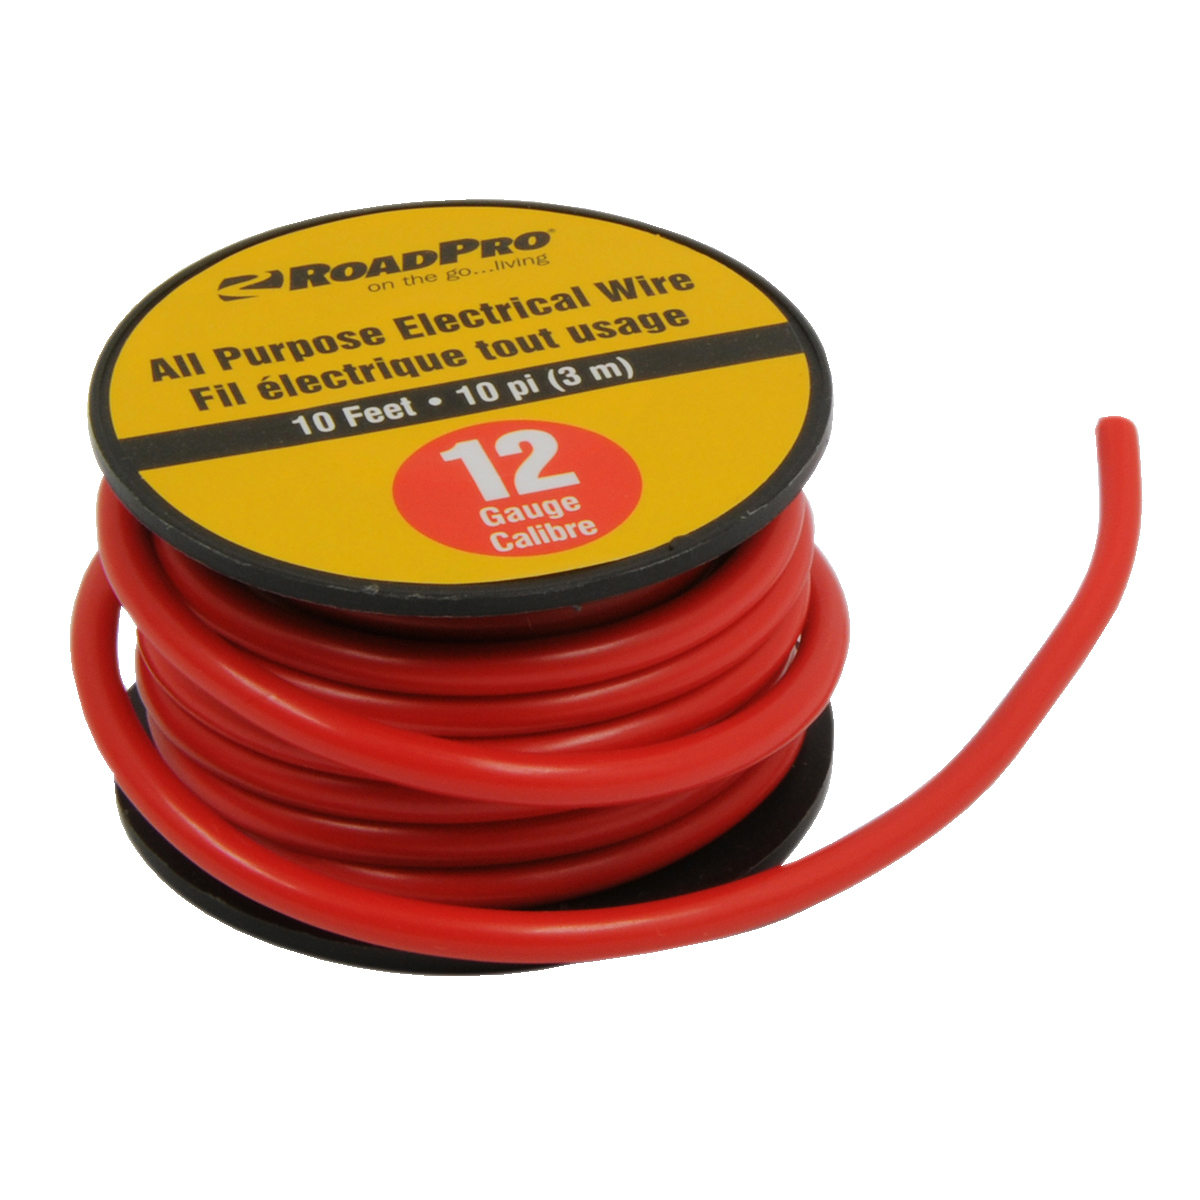 RoadPro 12-Gauge 10' All Purpose Electrical Wire, Spool